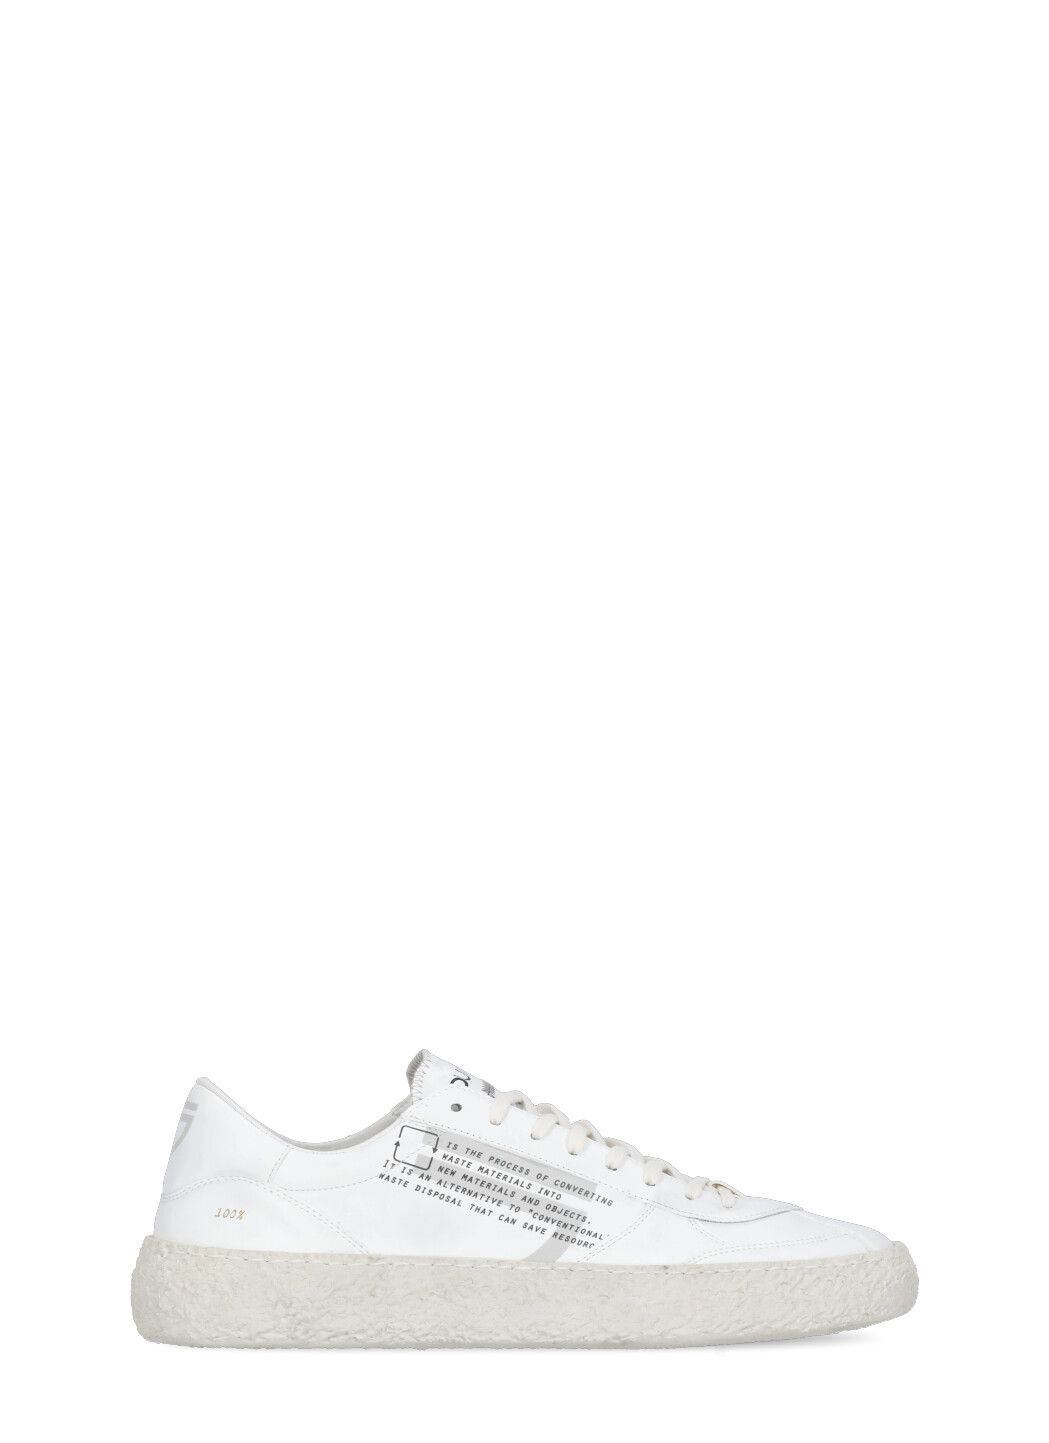 Basic Neve sneakers